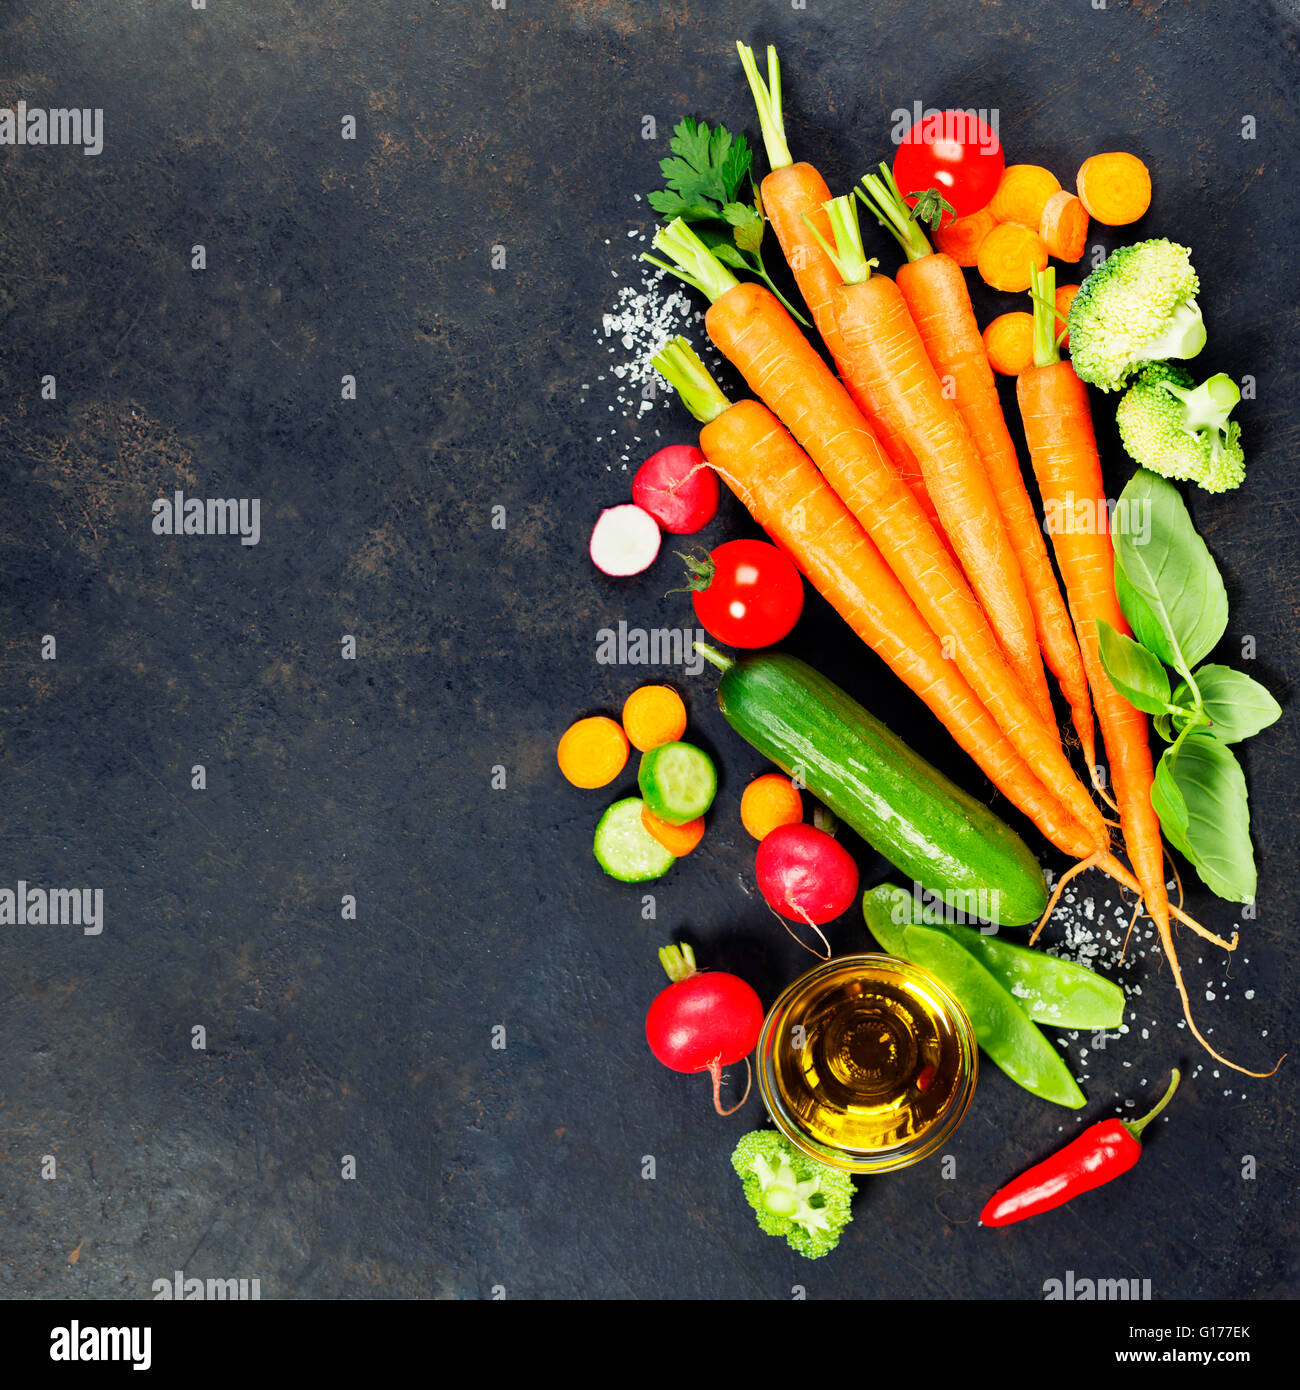 Fresh organic vegetables on dark rustic background. Healthy food. Vegetarian eating. Fresh harvest from the garden. Background l Stock Photo